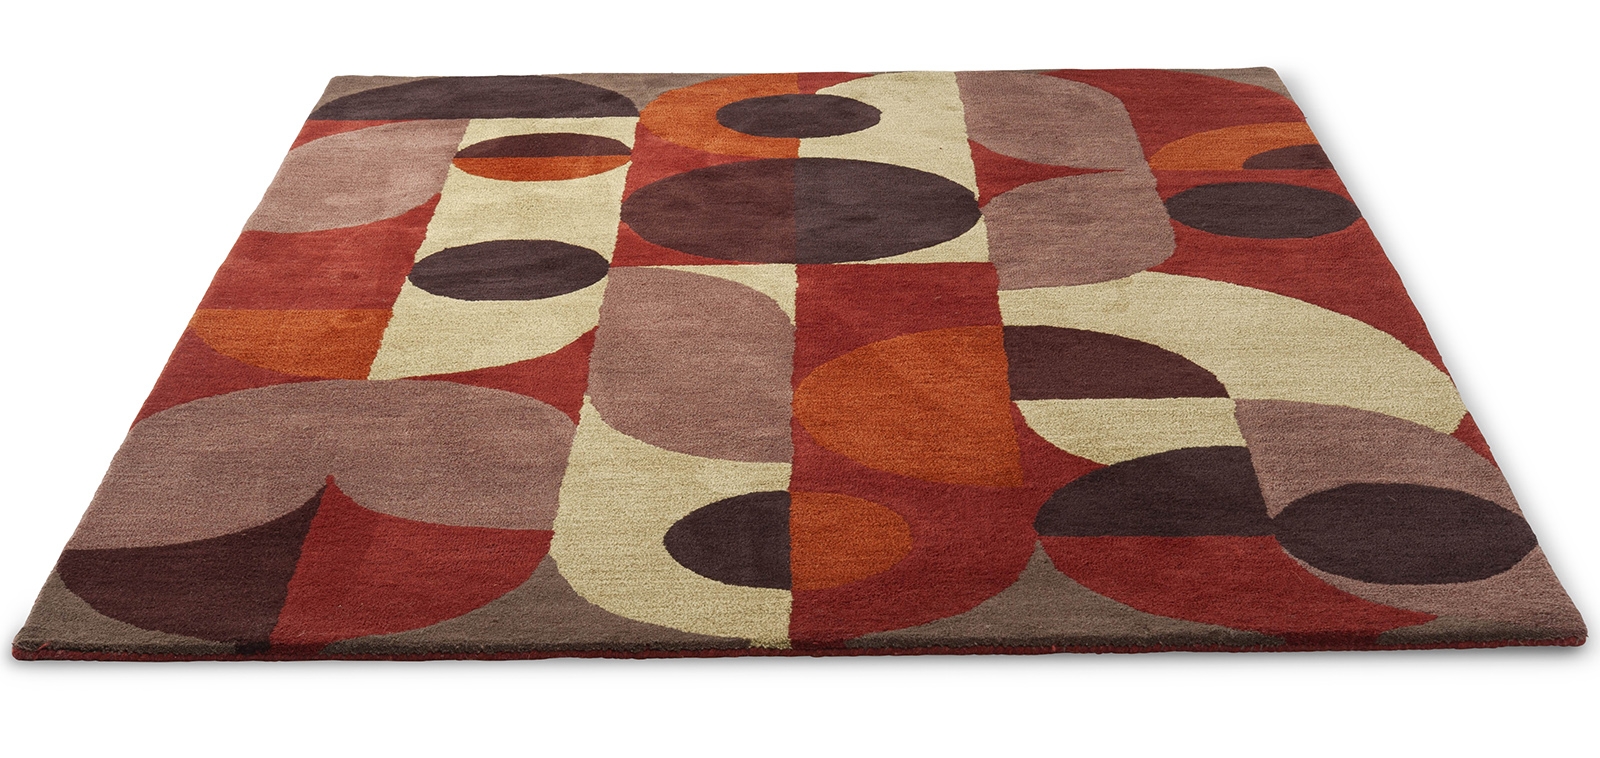 Decor Red Pale Rug ☞ Size: 140 x 200 cm